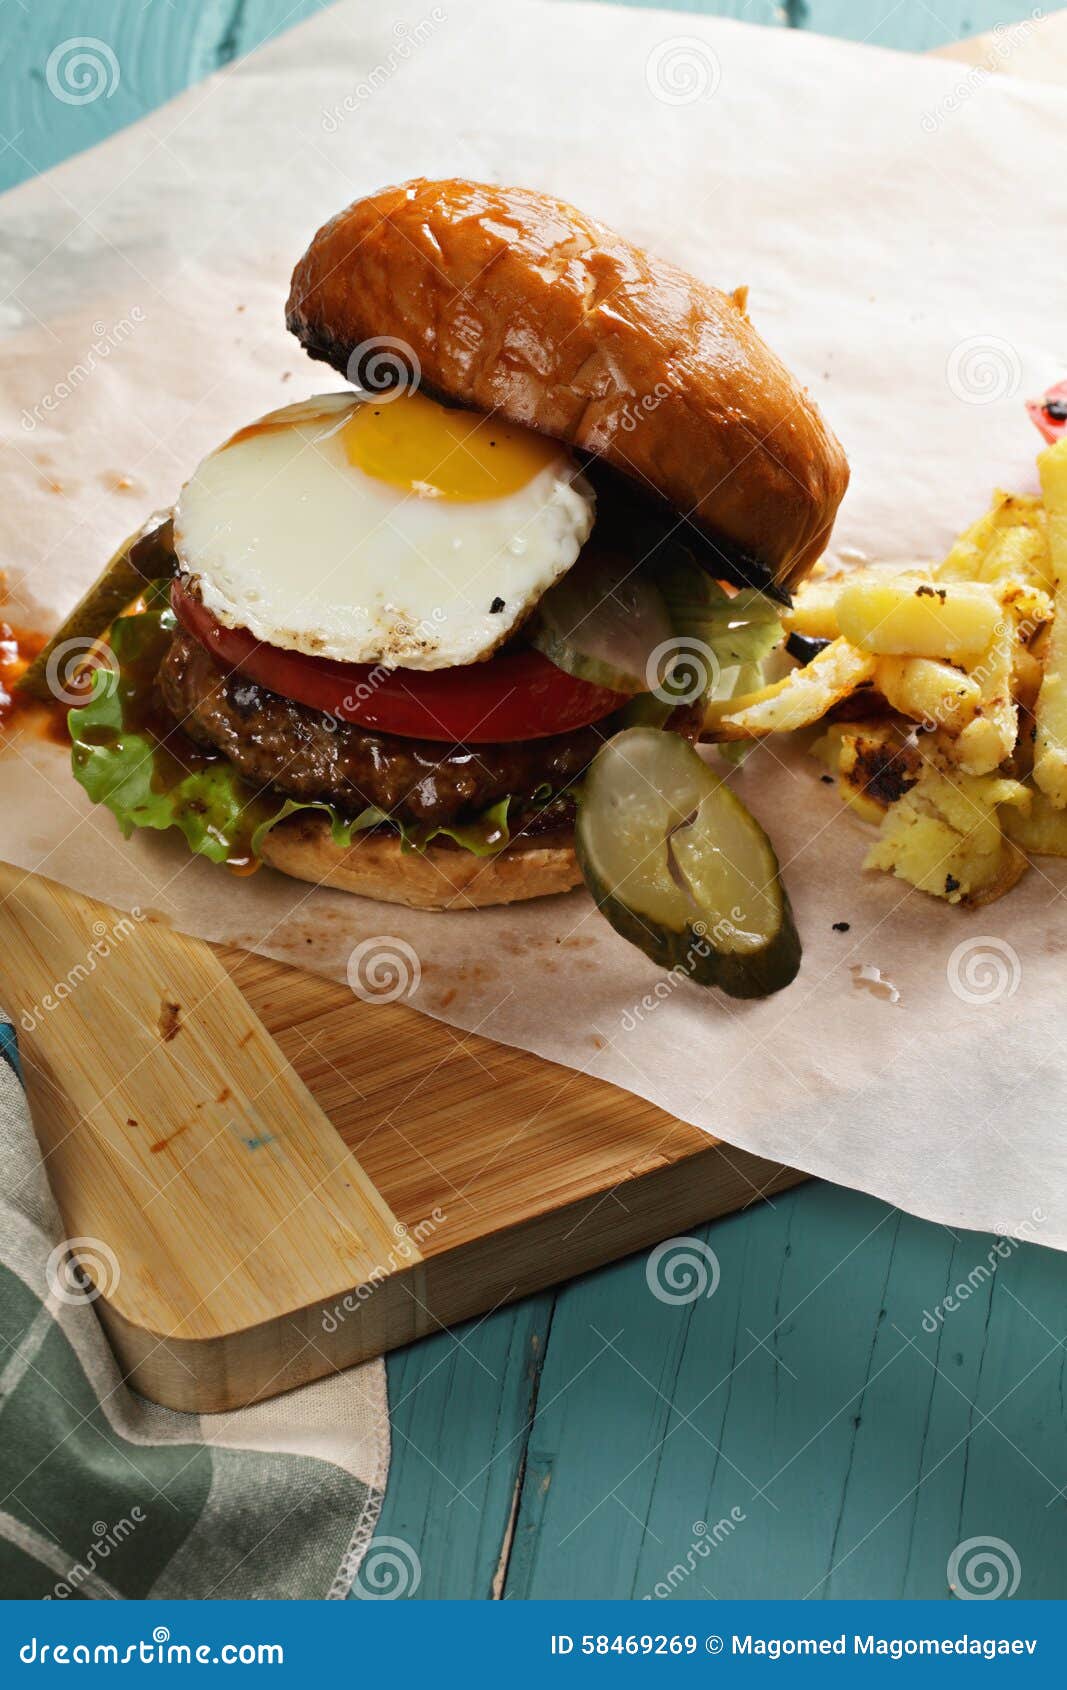 Sunny Side Up Burger on a Wooden Tabletop Stock Image - Image of paper ...